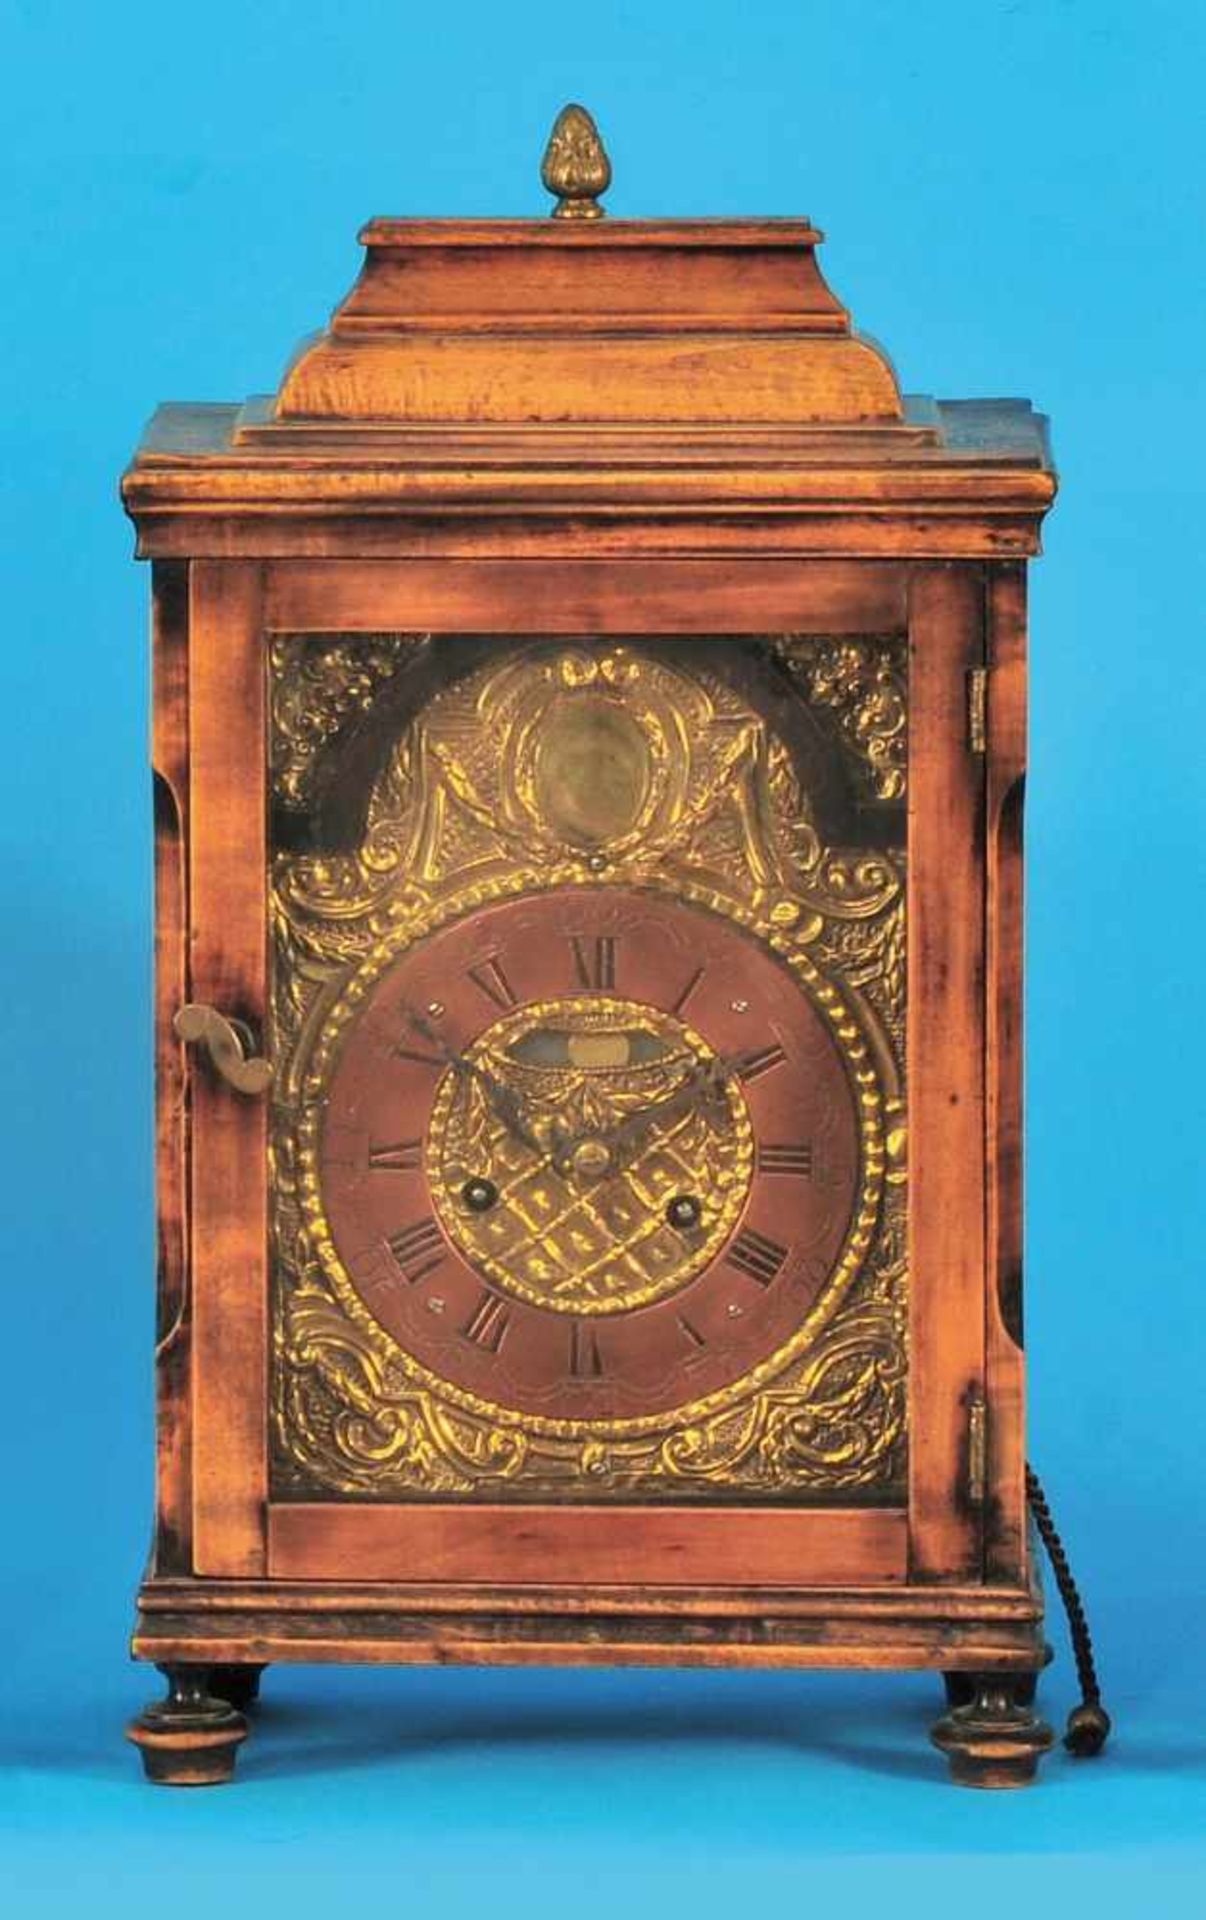 Small wooden table clock with spindle movement and halfhour strike on bell